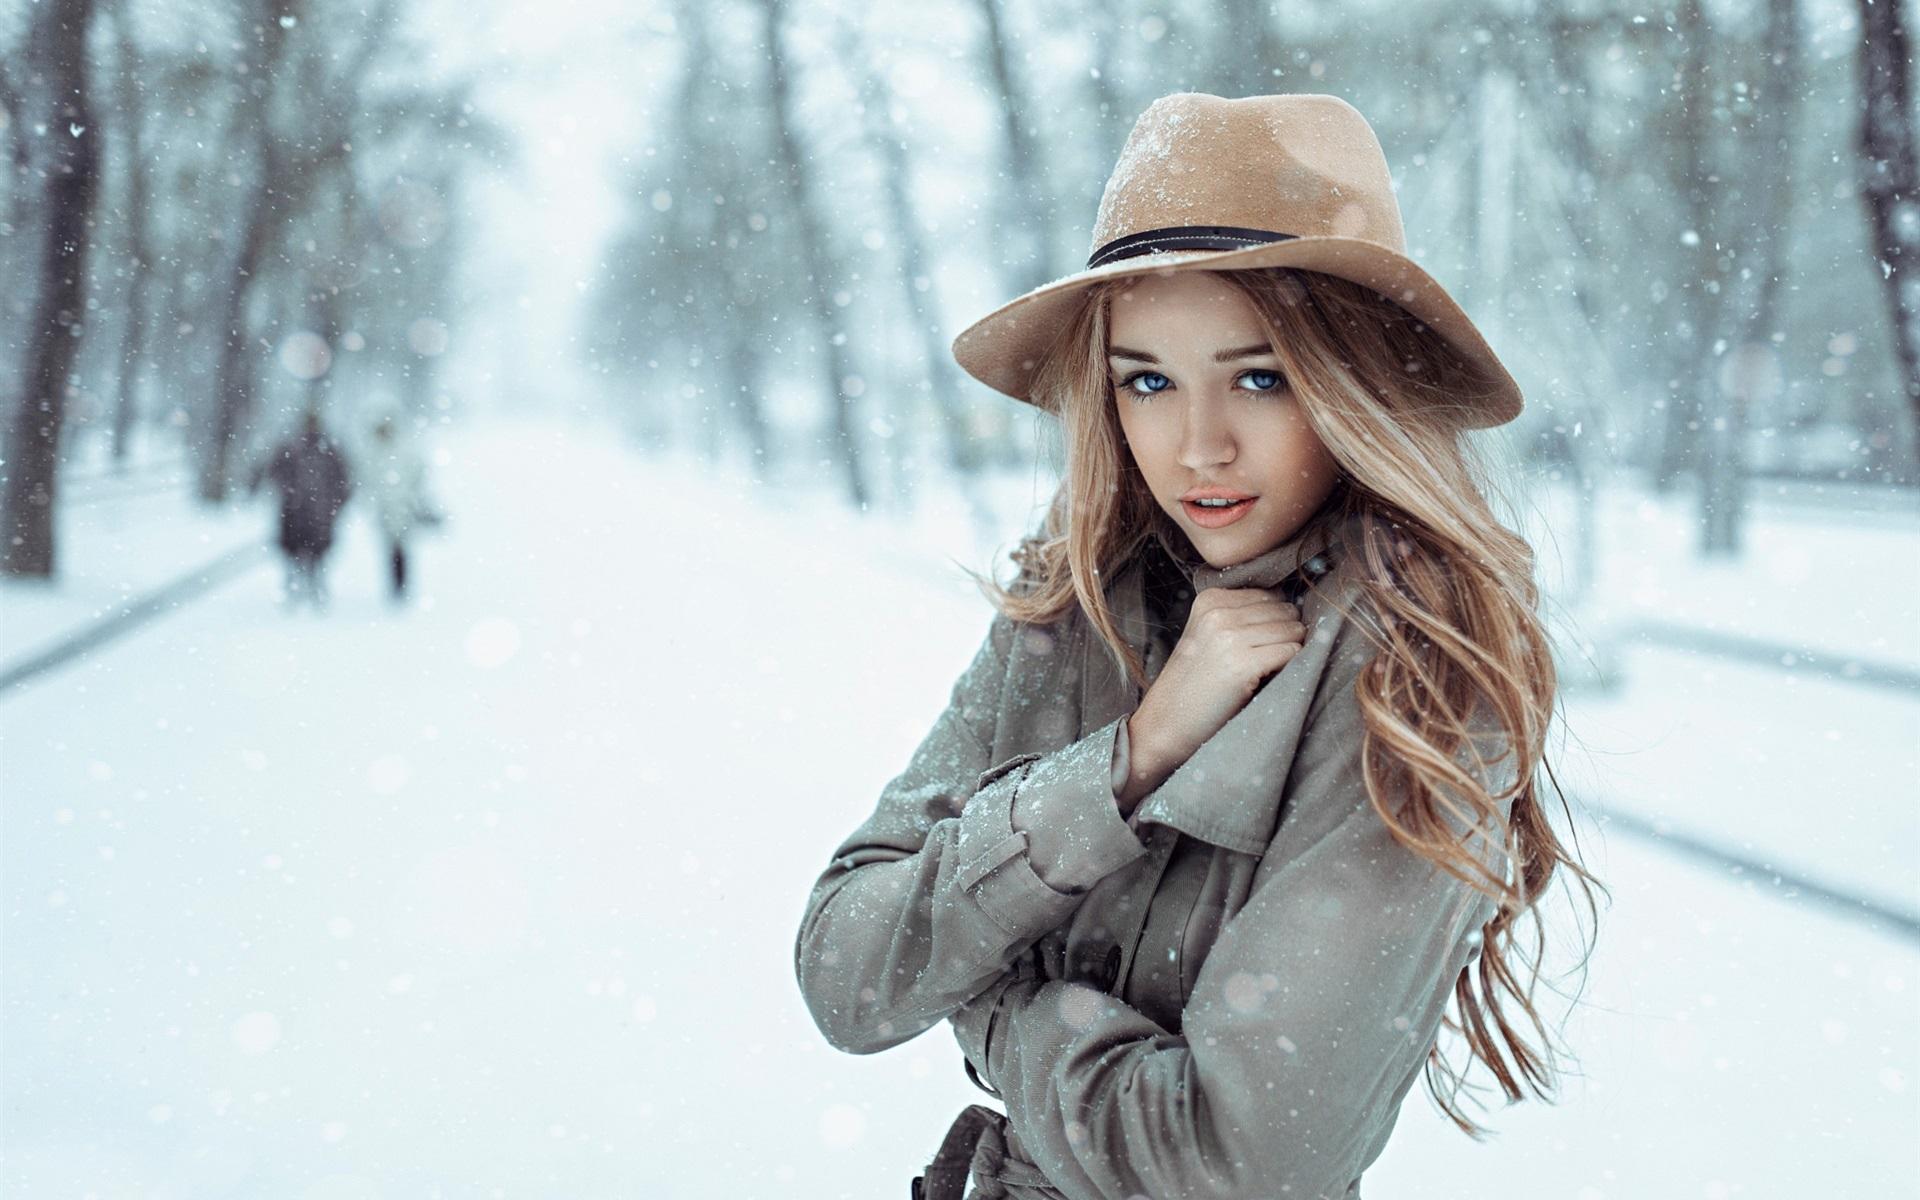 Girl And Snow Wallpapers - Wallpaper Cave